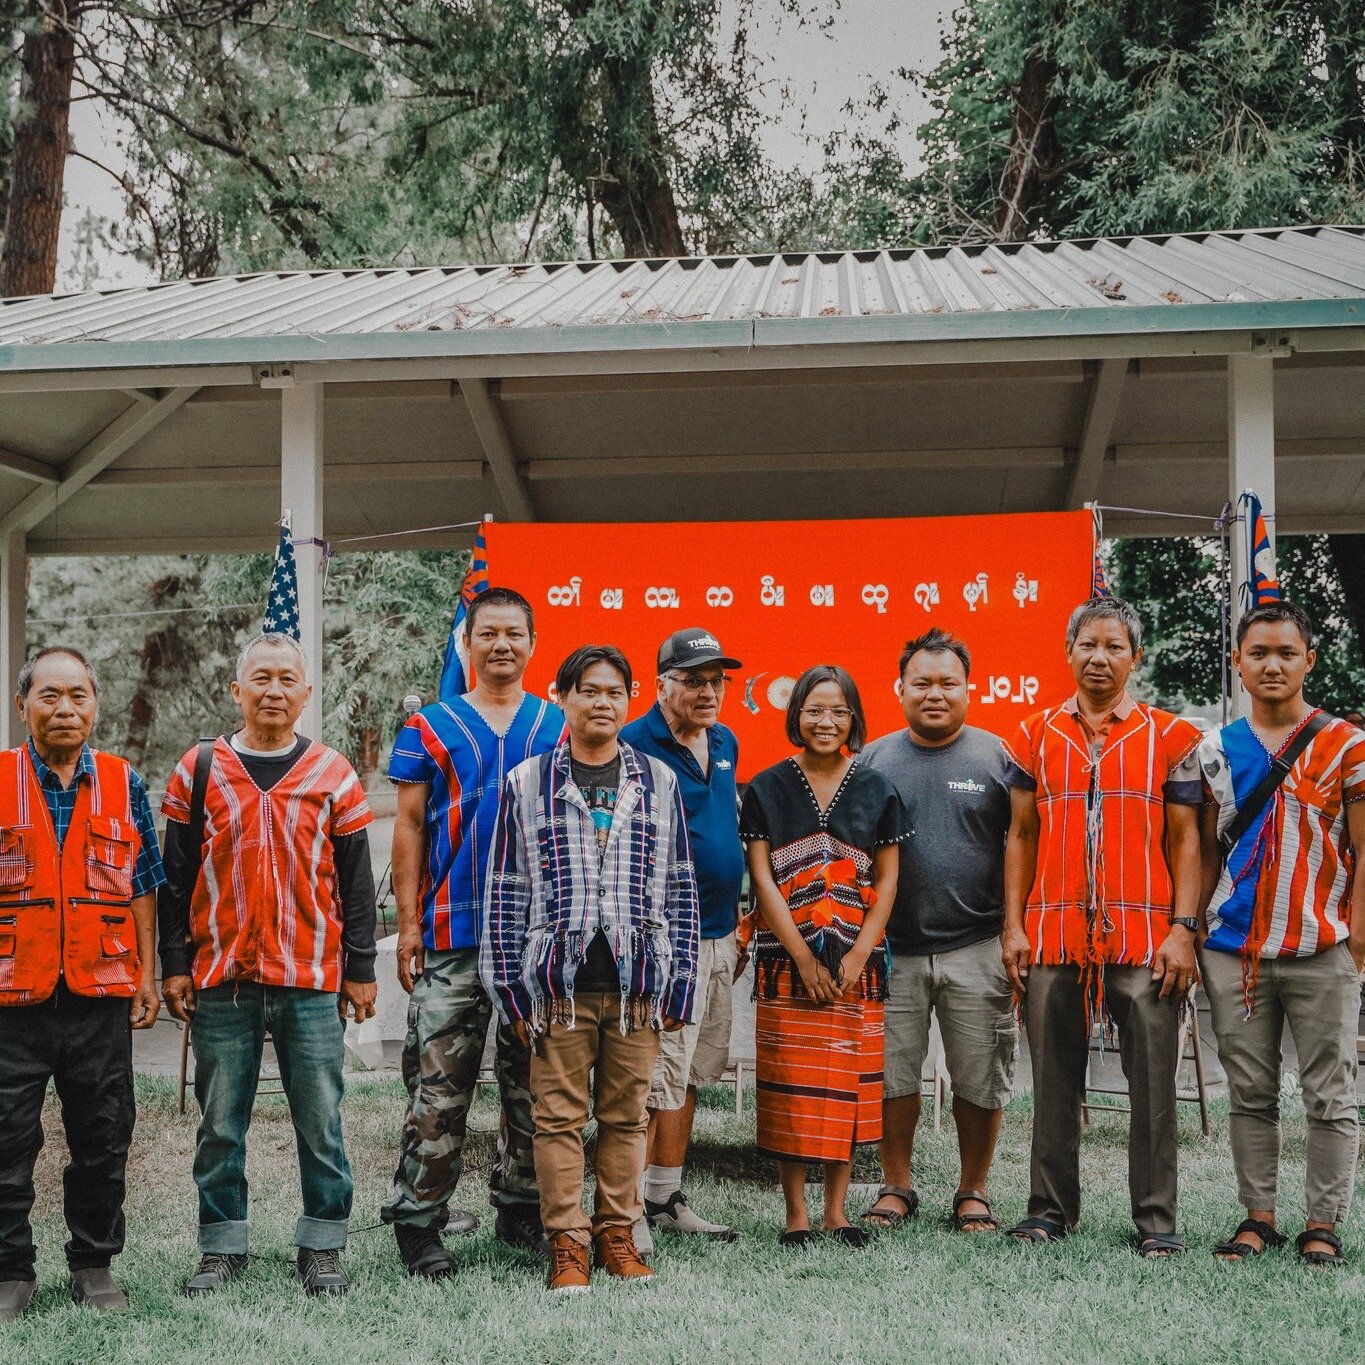 In memorial of Karen Martyrs' Day (MaTooRa Commemoration), Thrive International sponsored a regional community event to honor the brave freedom fighters who sacrificed their lives for Karen independence. We are excited to further our mission of empow